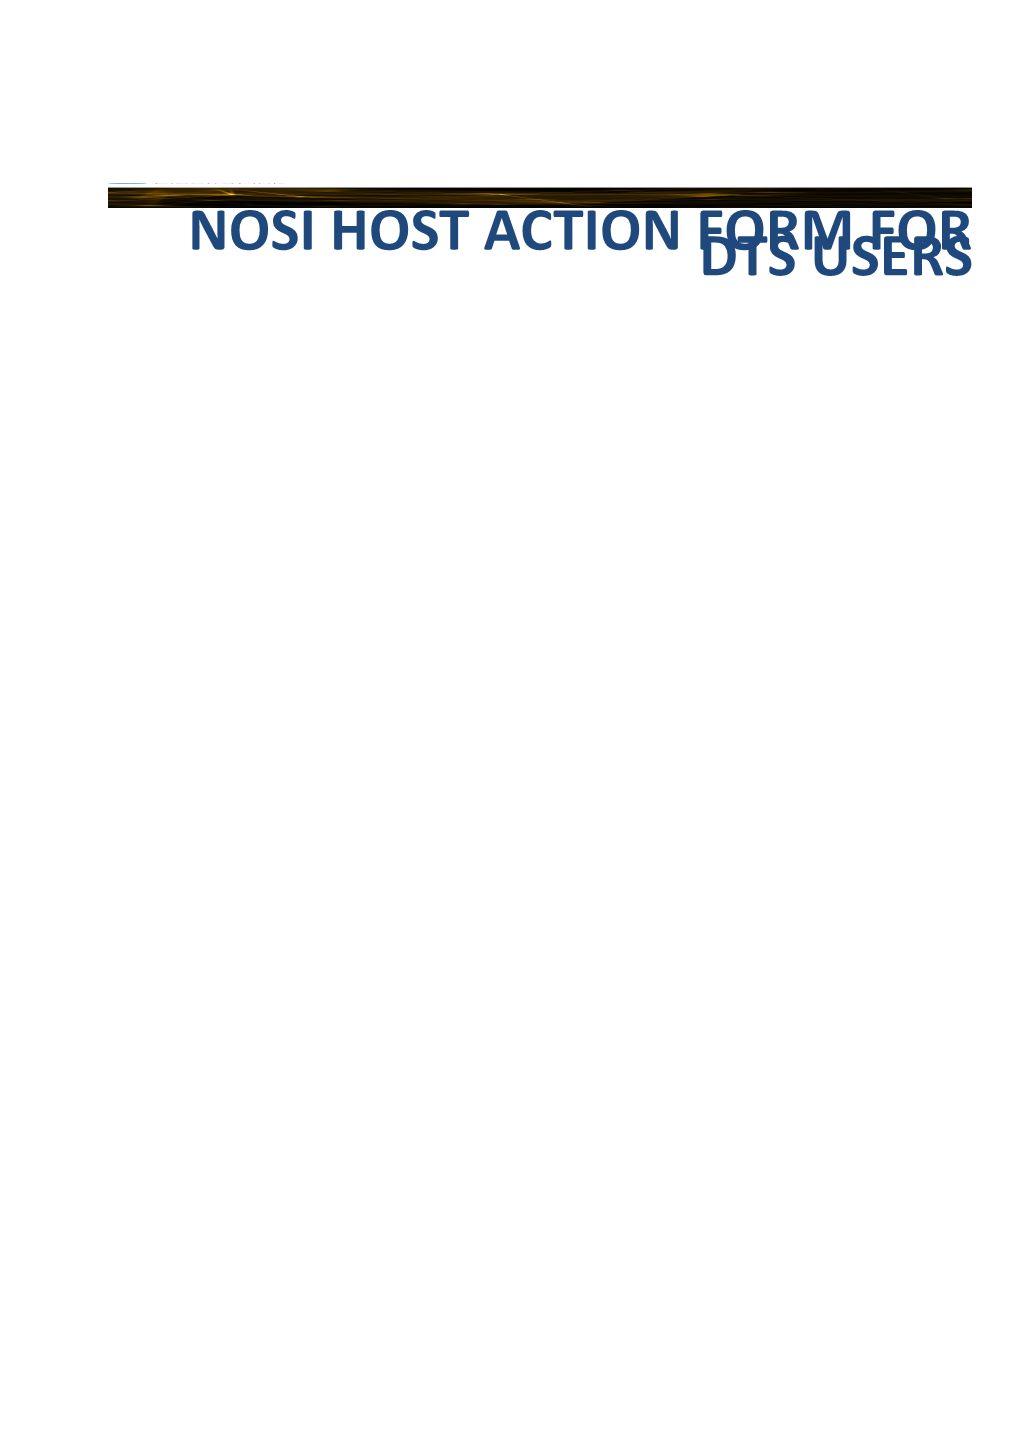 NOSI HOST ACTION FORM for DTS Users